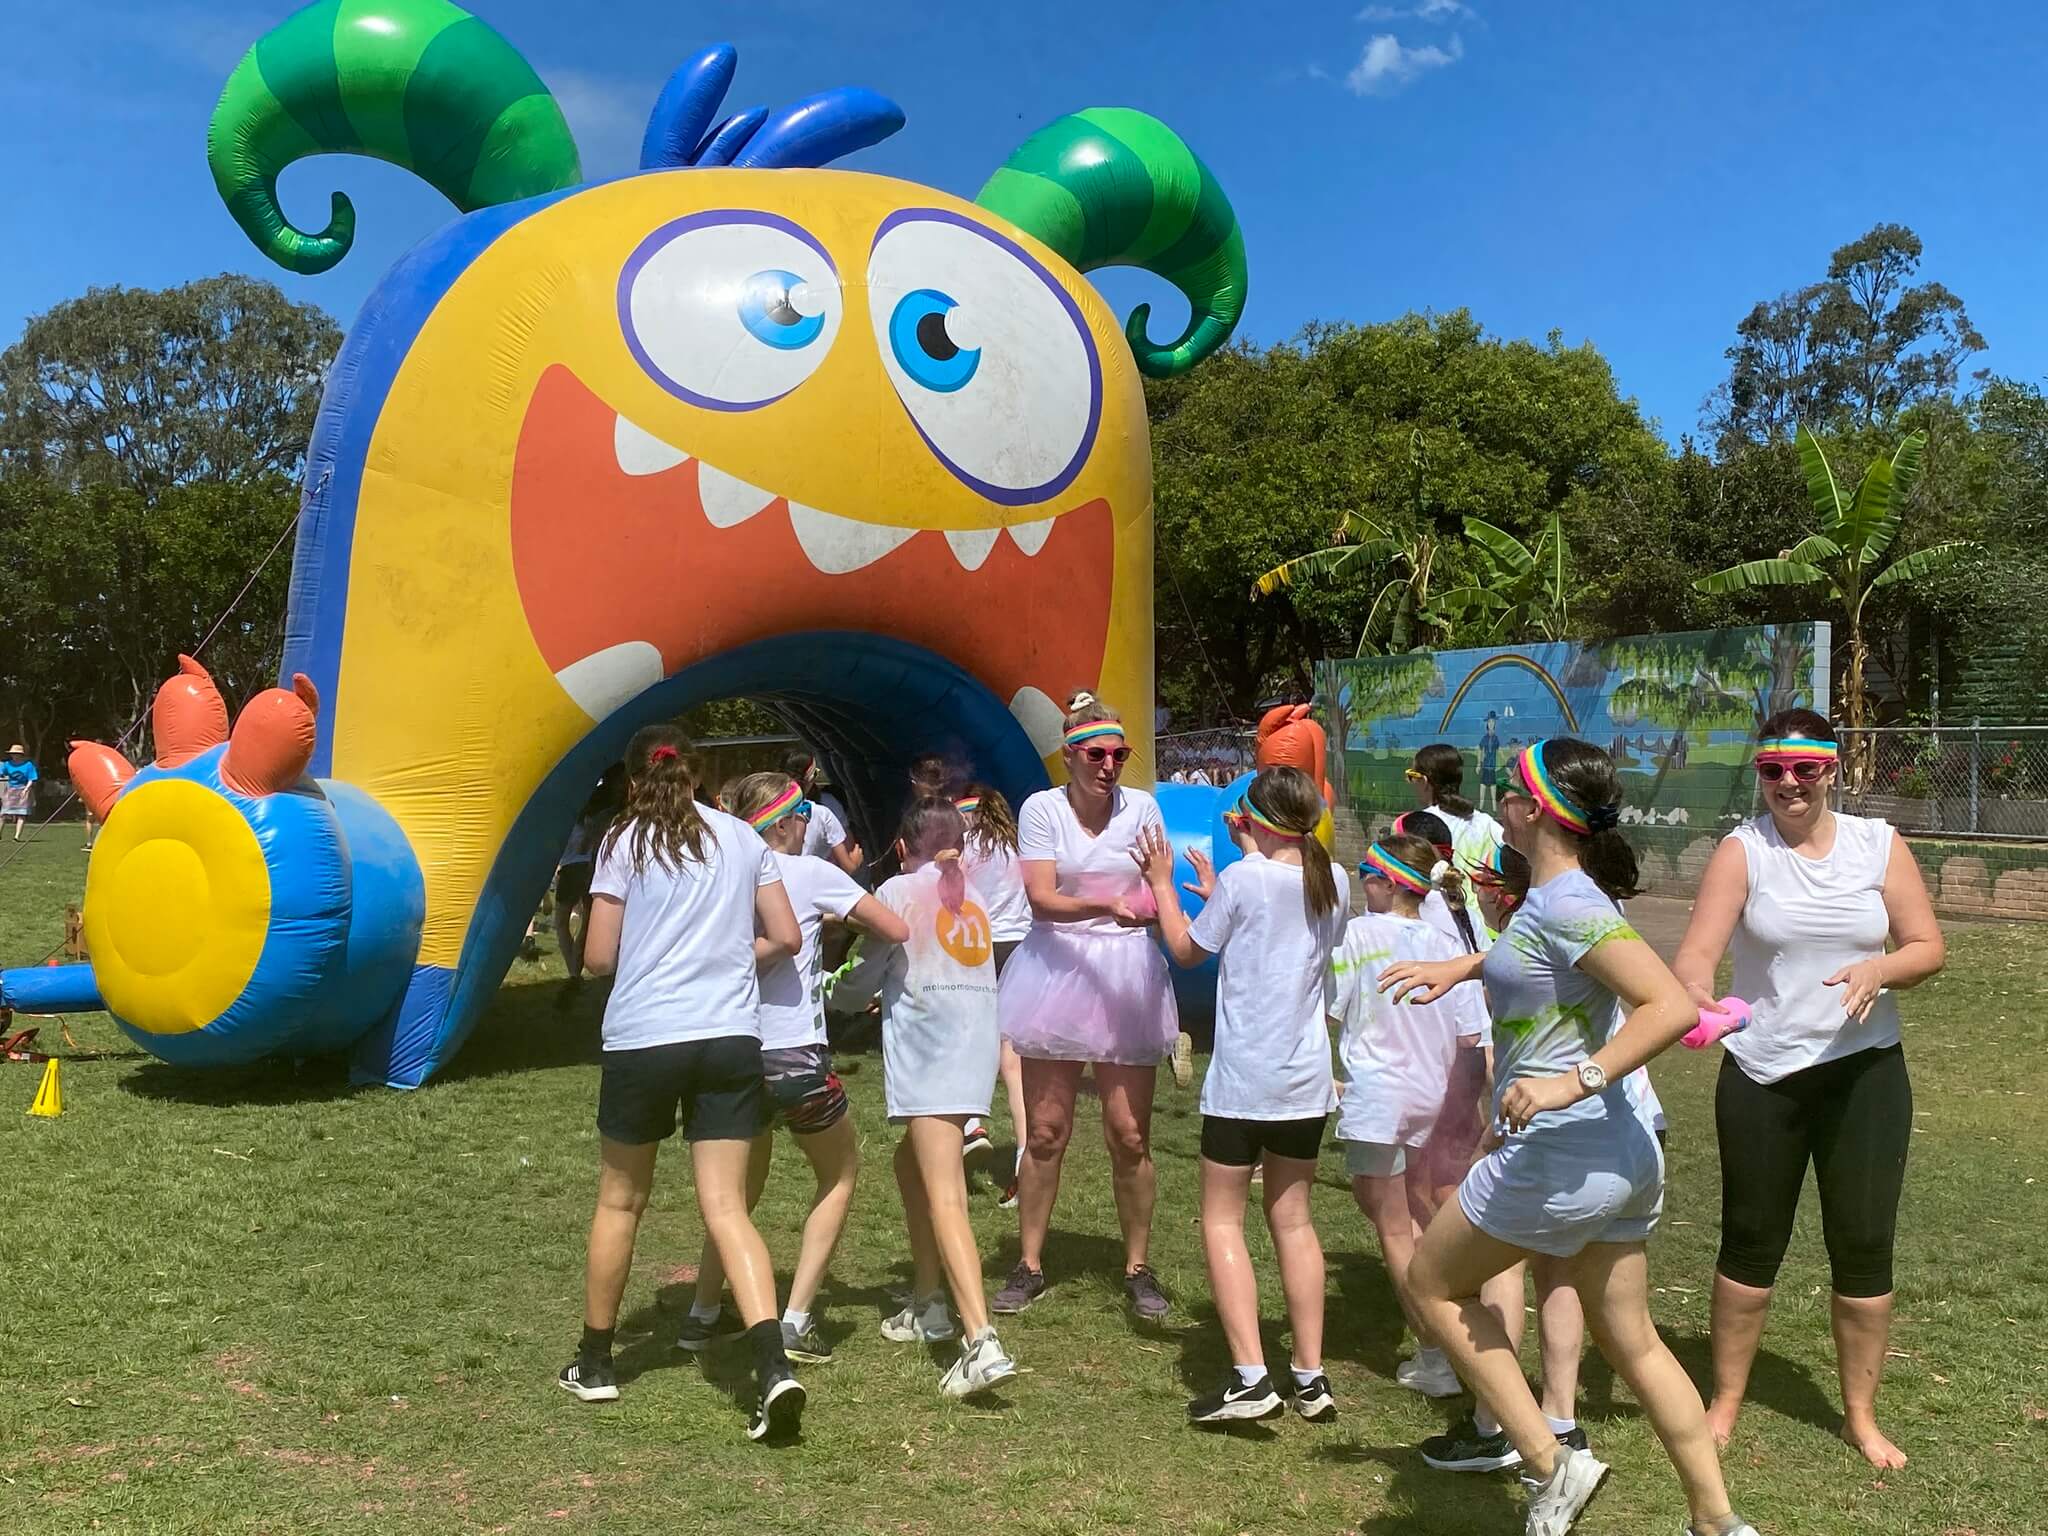 Inflatables can help take your event from bland to grand!